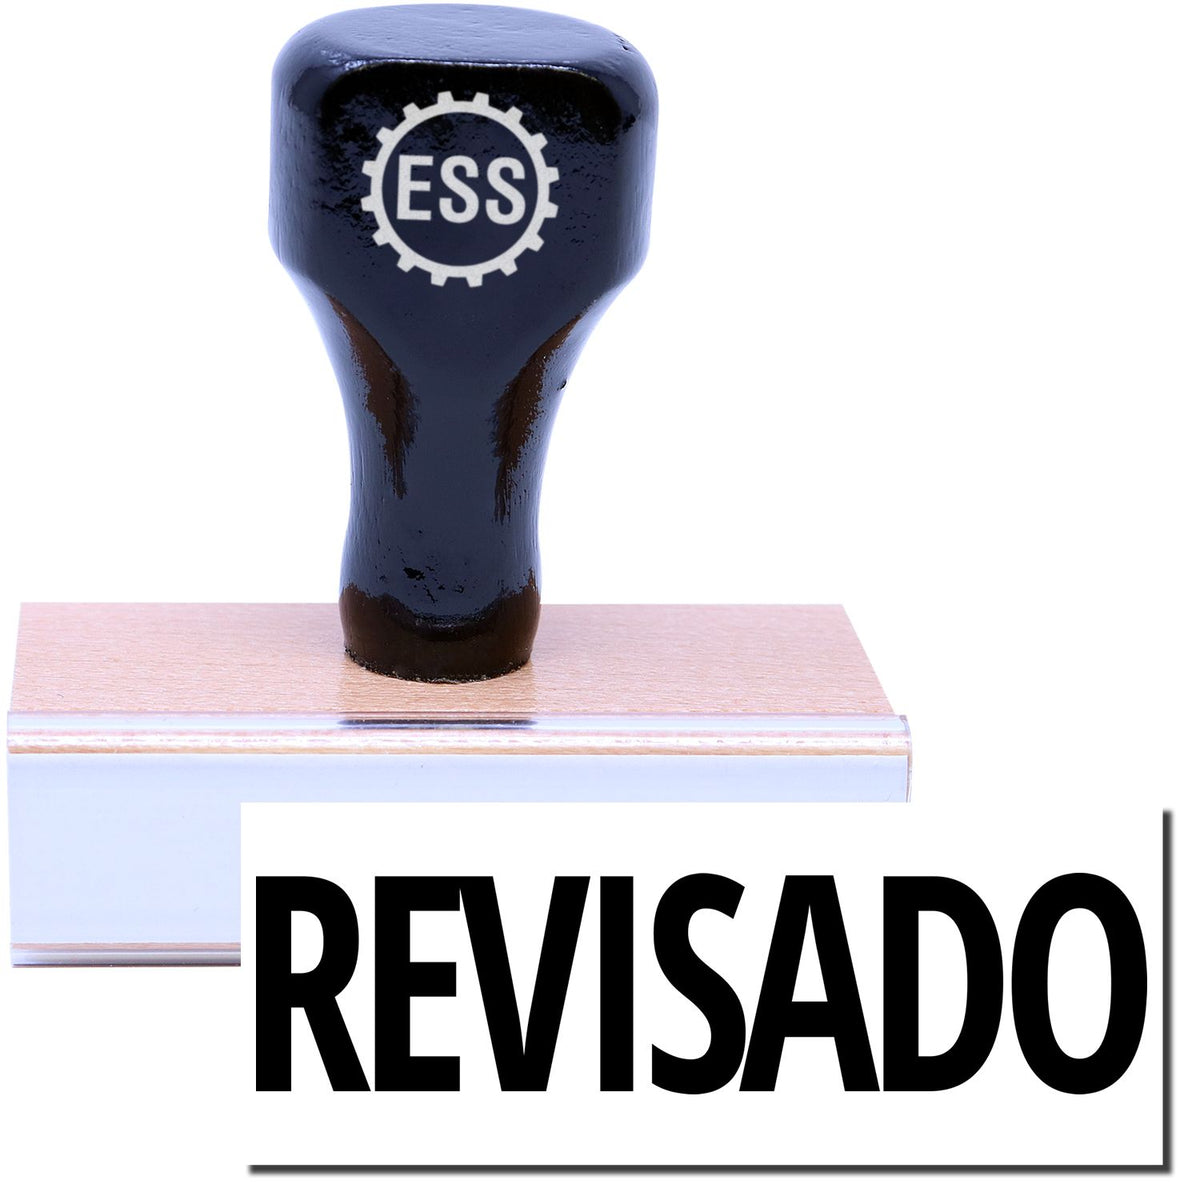 A stock office rubber stamp with a stamped image showing how the text &quot;REVISADO&quot; in a large font is displayed after stamping.